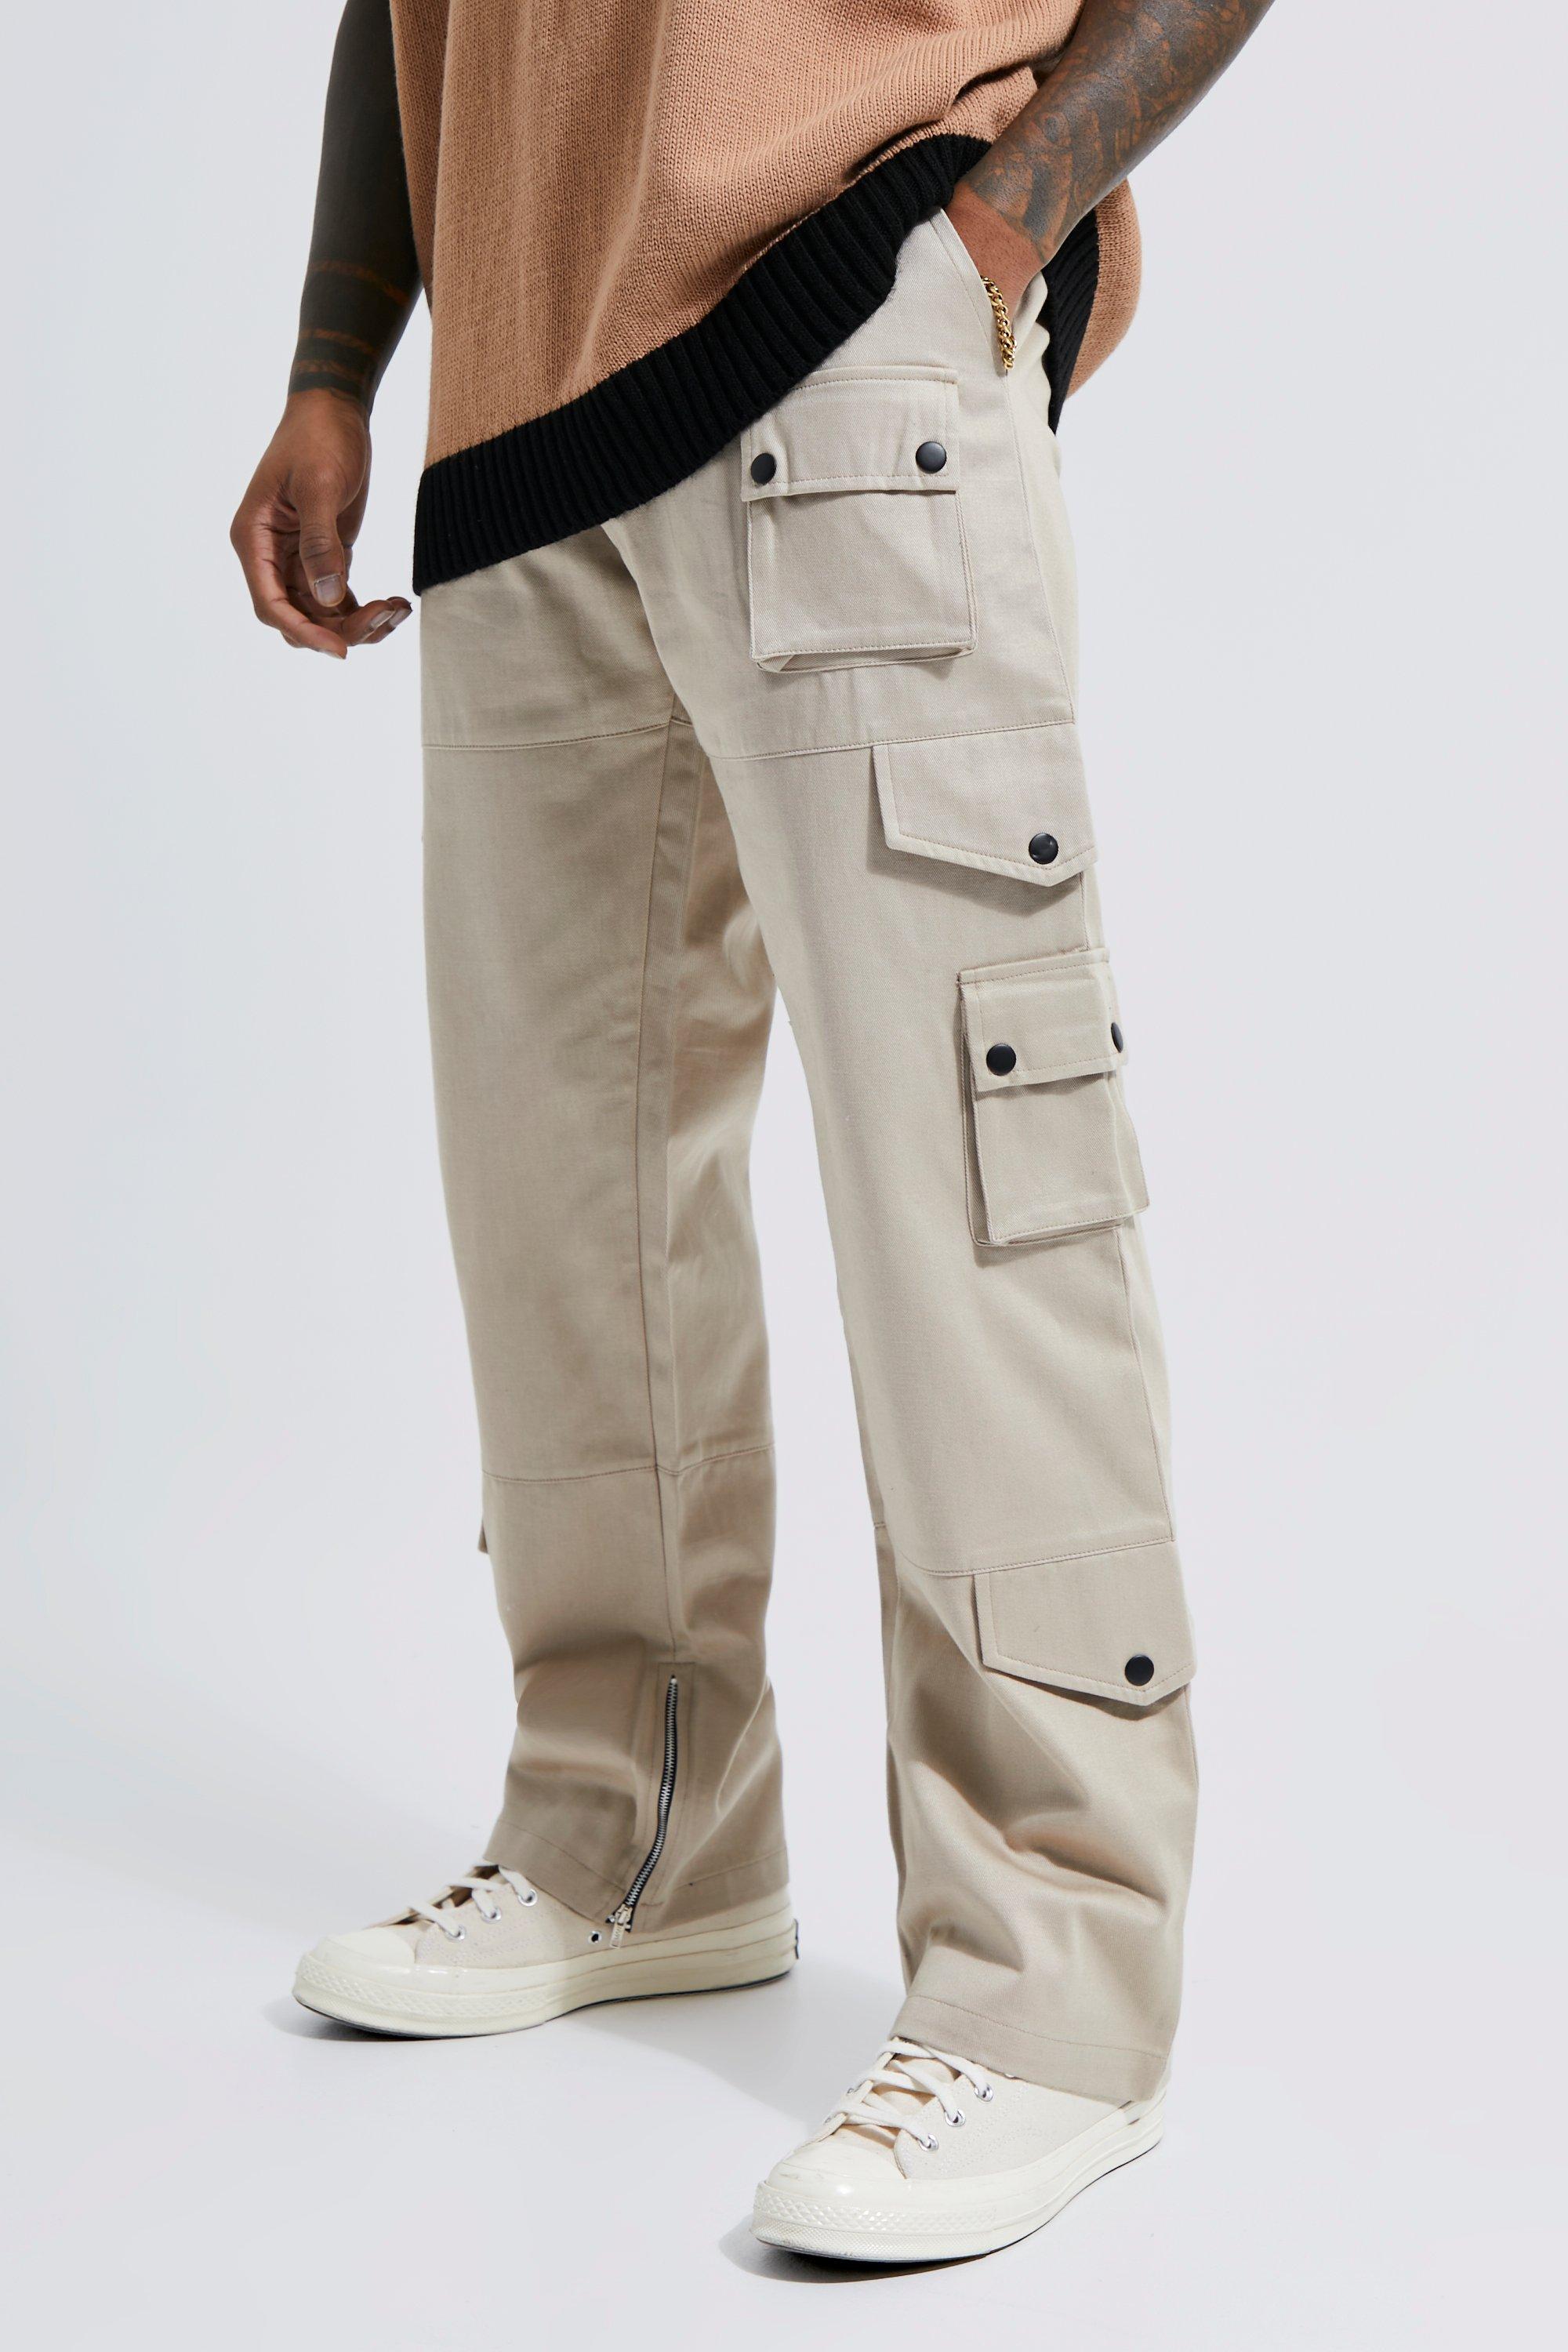 Casual Cotton Mens Cargo Pant Beige Color Cargo Fawn Color Cargo  Relaxed Fit Cargo Good Quality